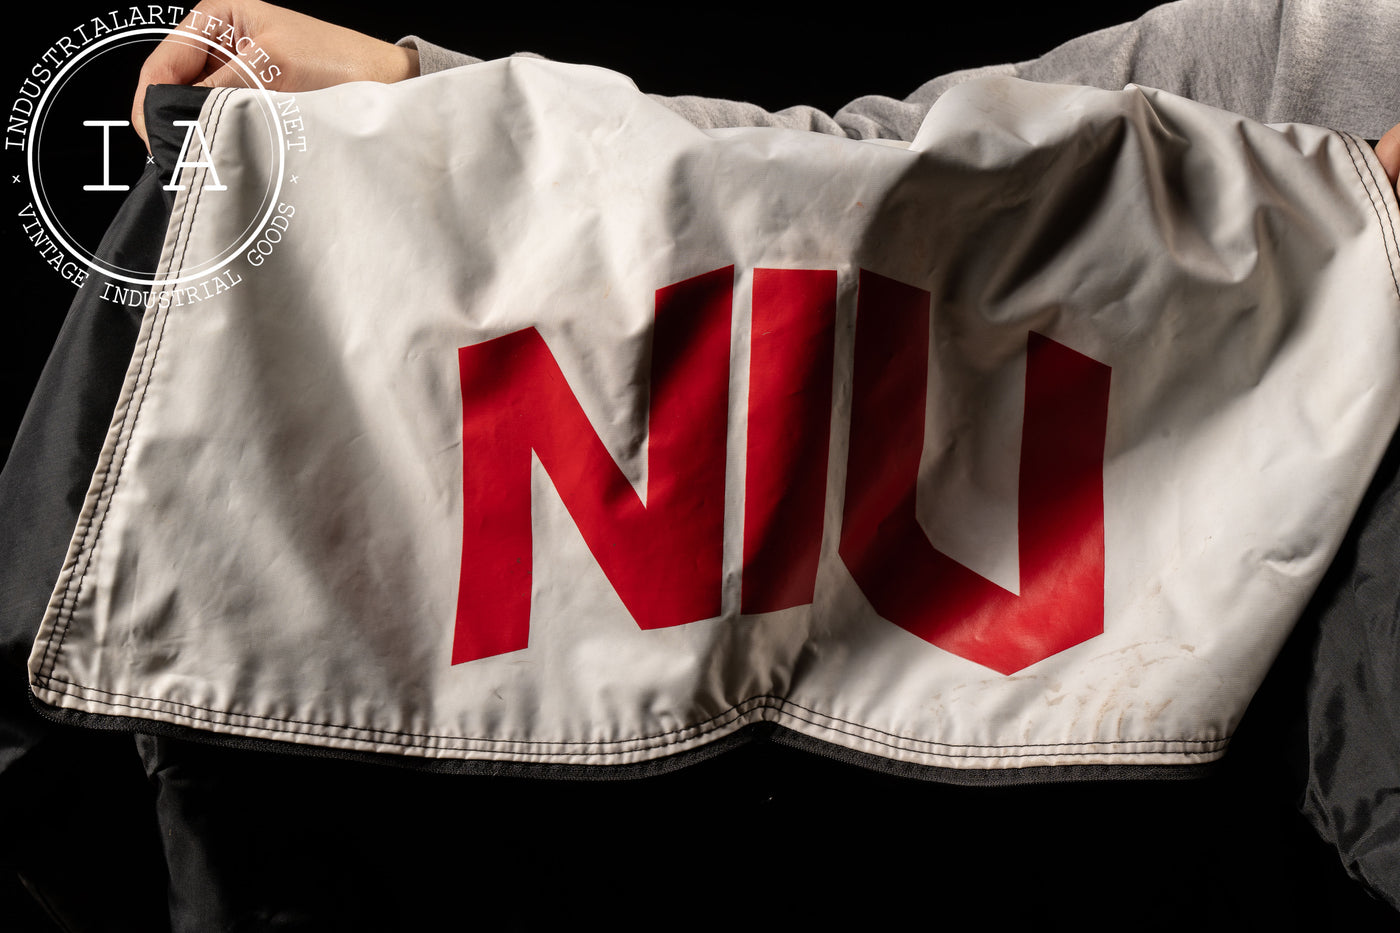 Vintage NIU Marching Band All-Weather Coat